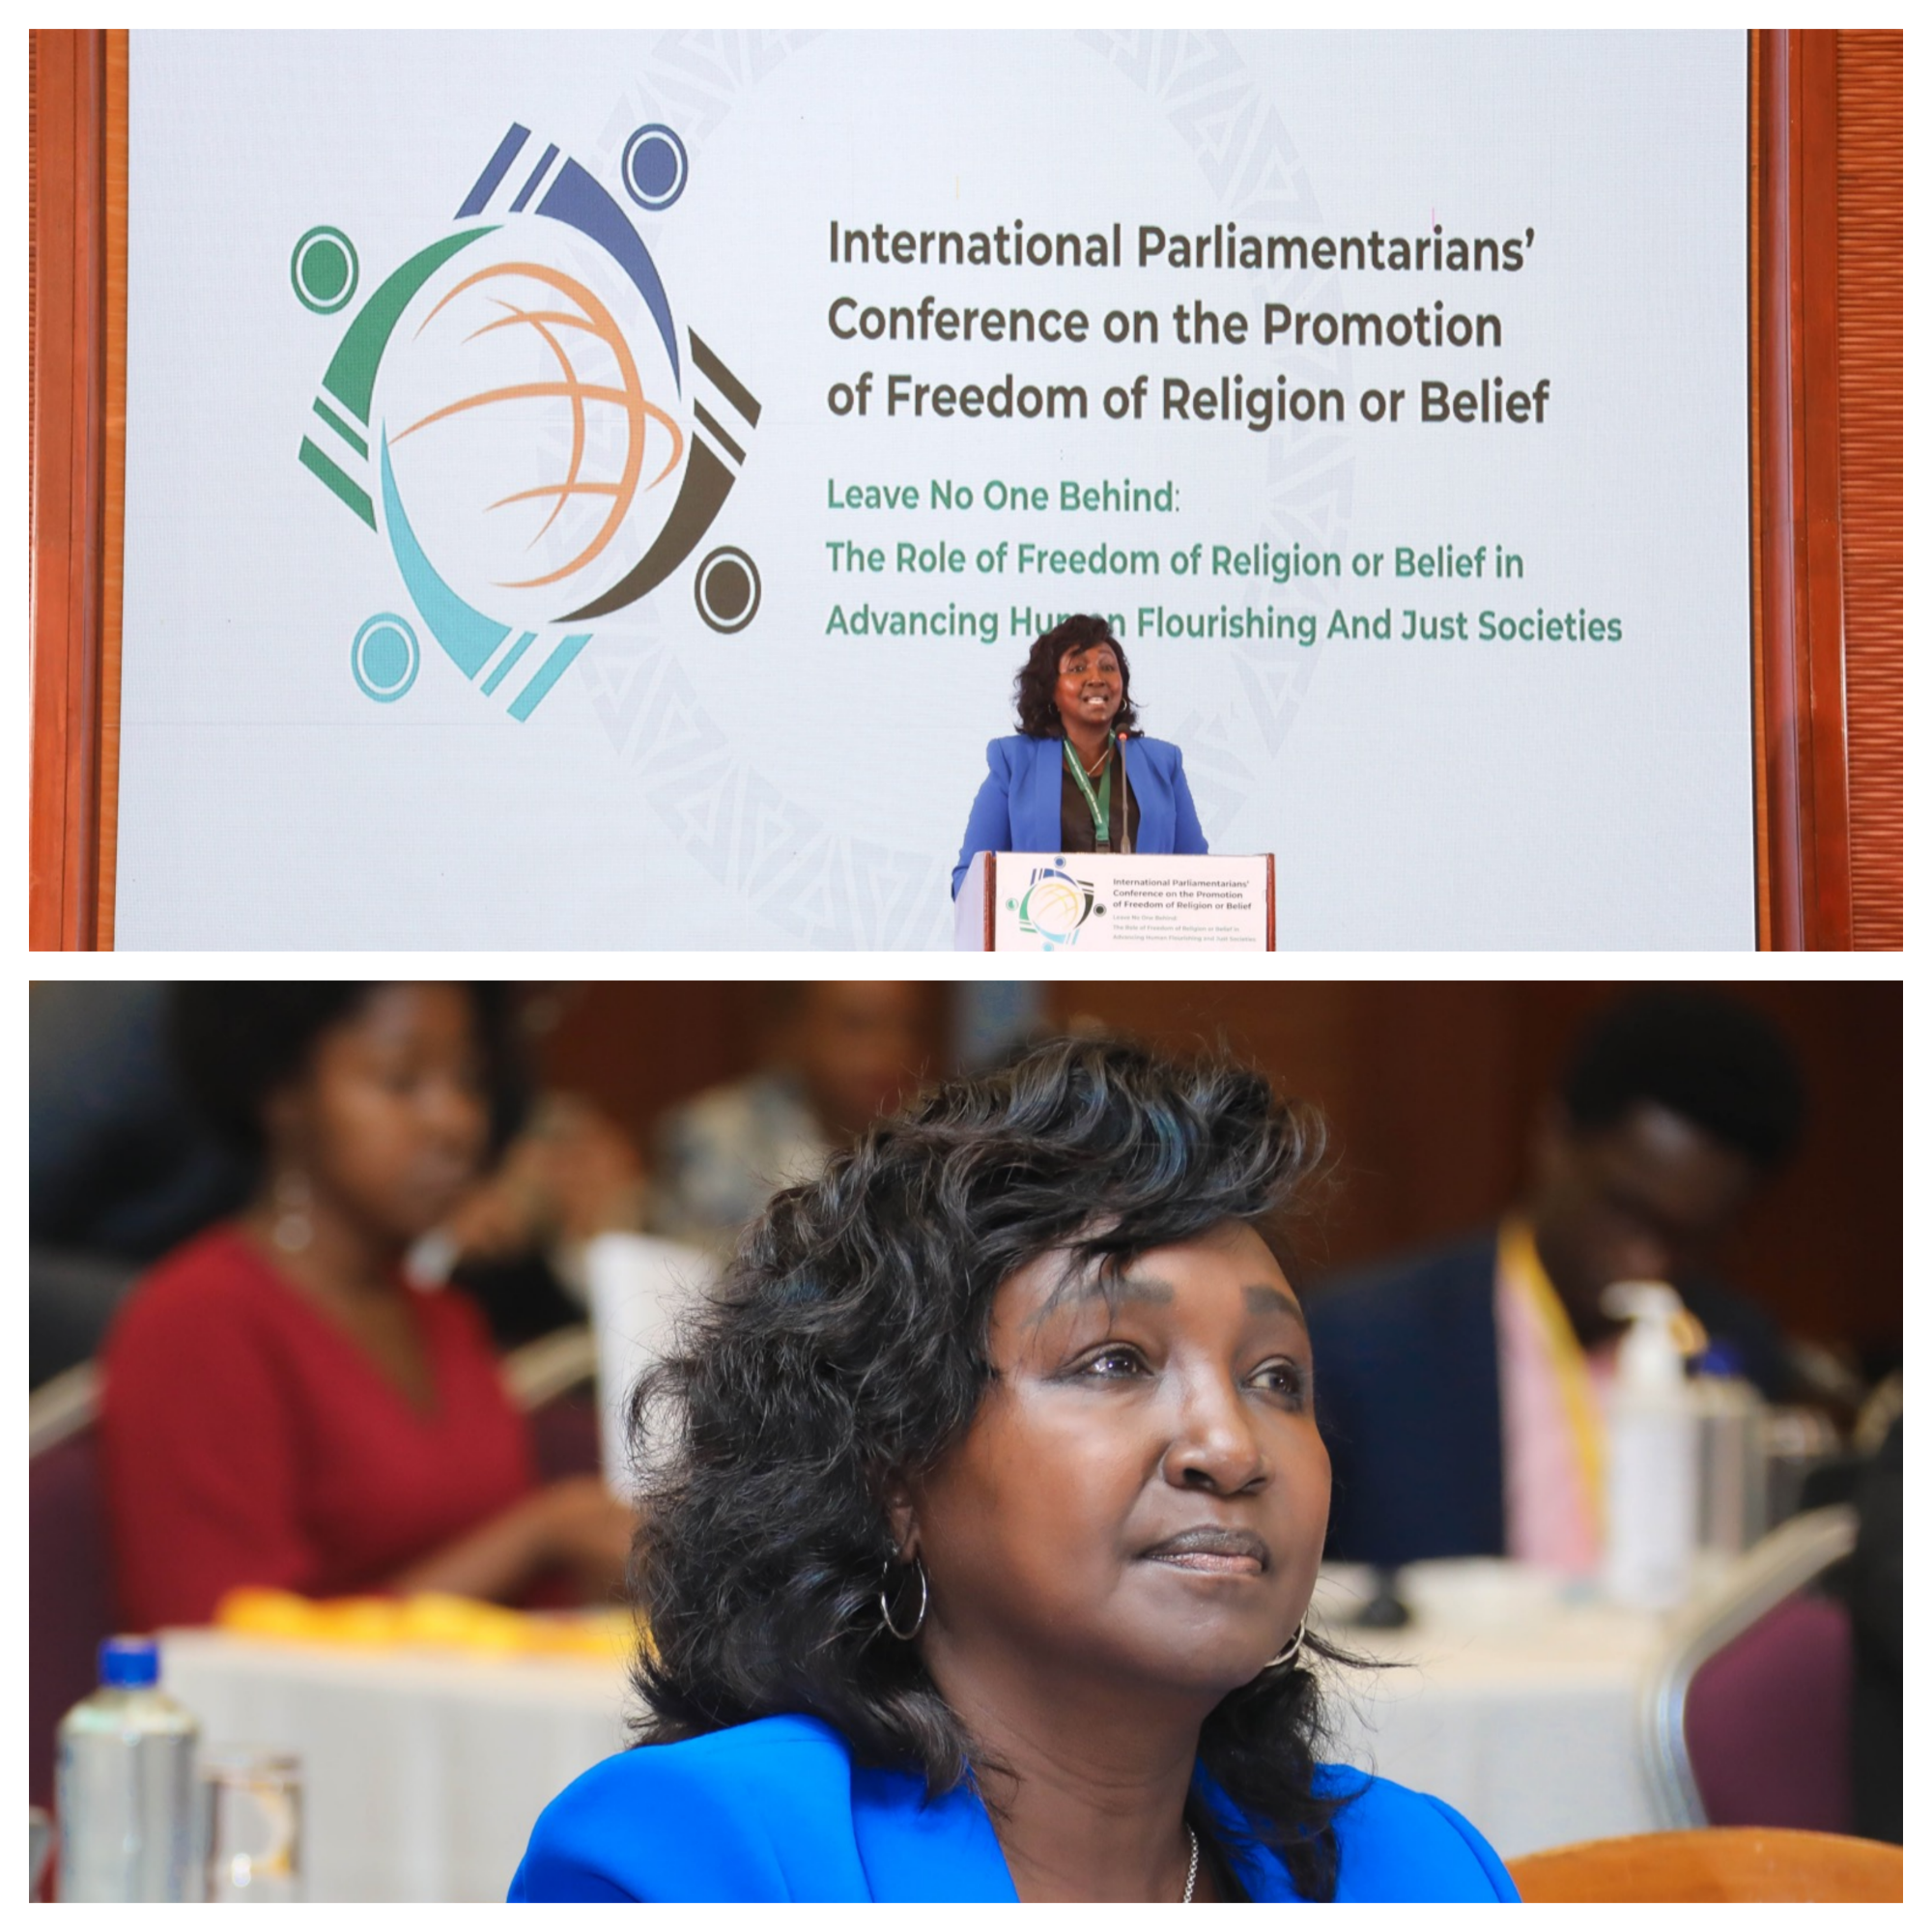 DEPUTY SPEAKER LAUDS IPPFoRB FOR PROMOTING FREEDOM OF RELIGION AND BELIEF